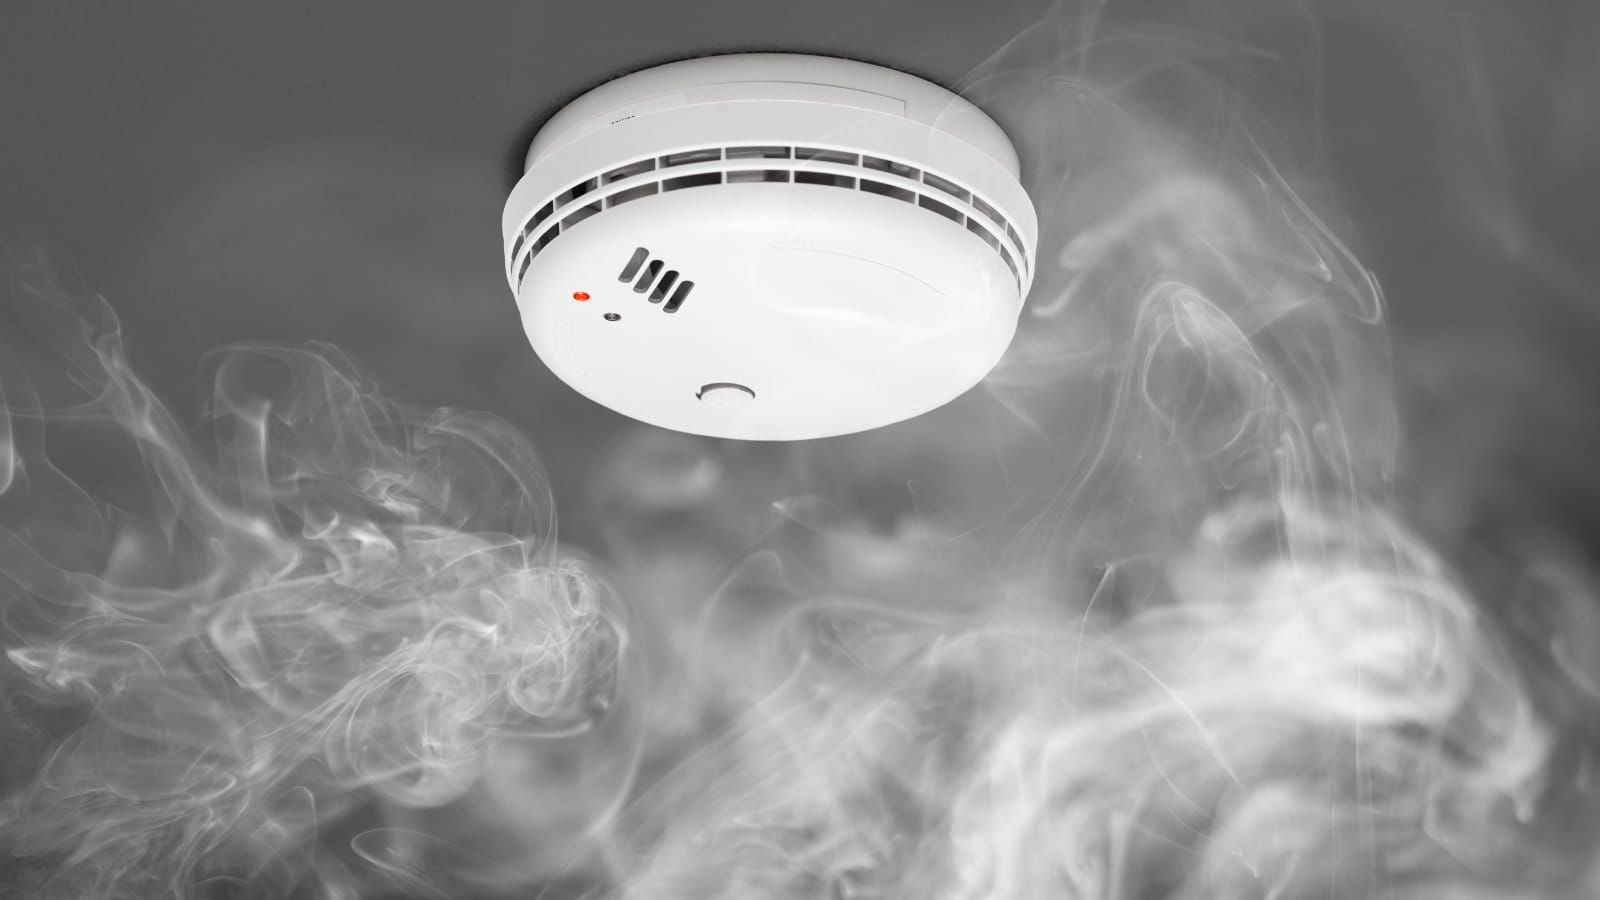 Smoke alarm activated with visible smoke against a gray background, illustrating the importance of fire safety and the functionality of smoke detectors in a home setting.